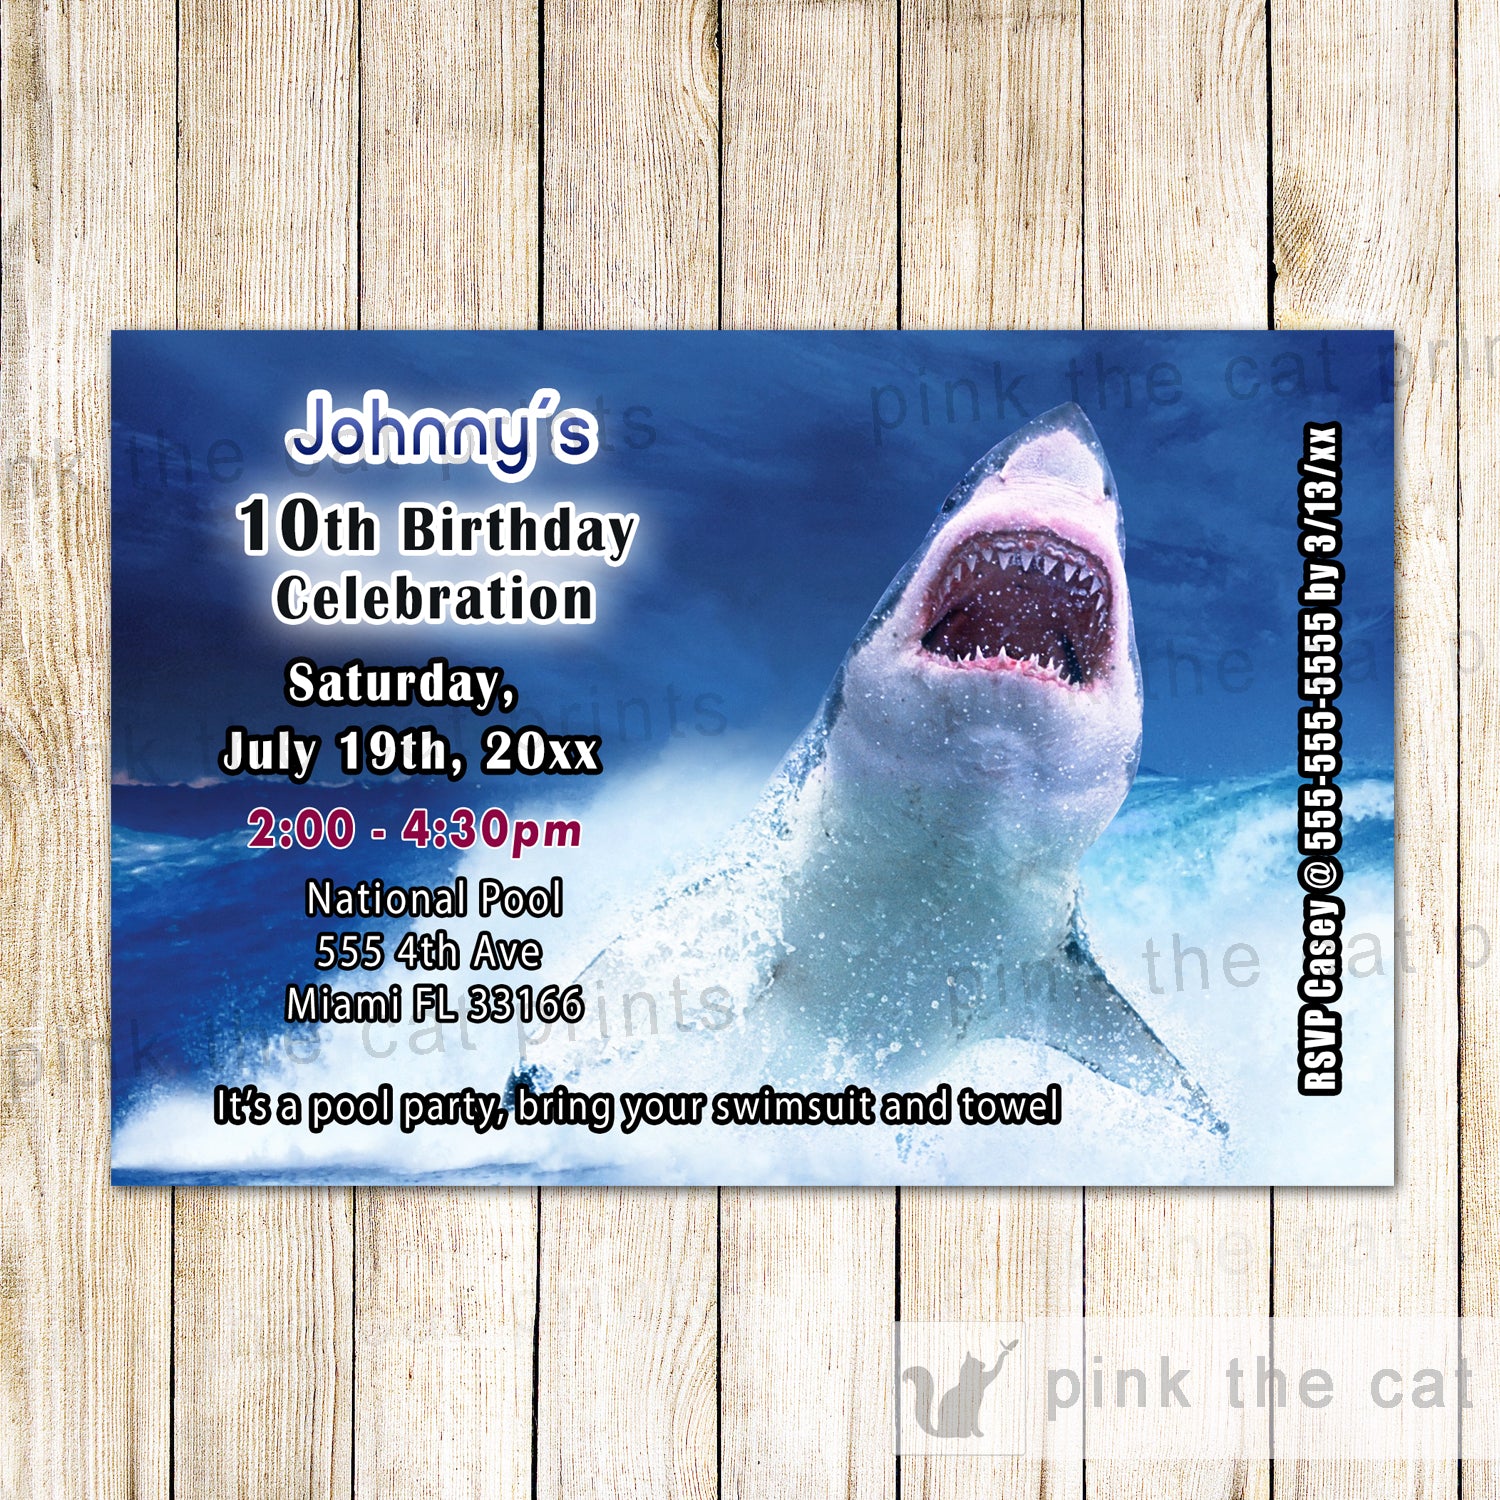 Real Shark Invitation Kids Birthday Party Under The Sea Printable Card –  Pink the Cat